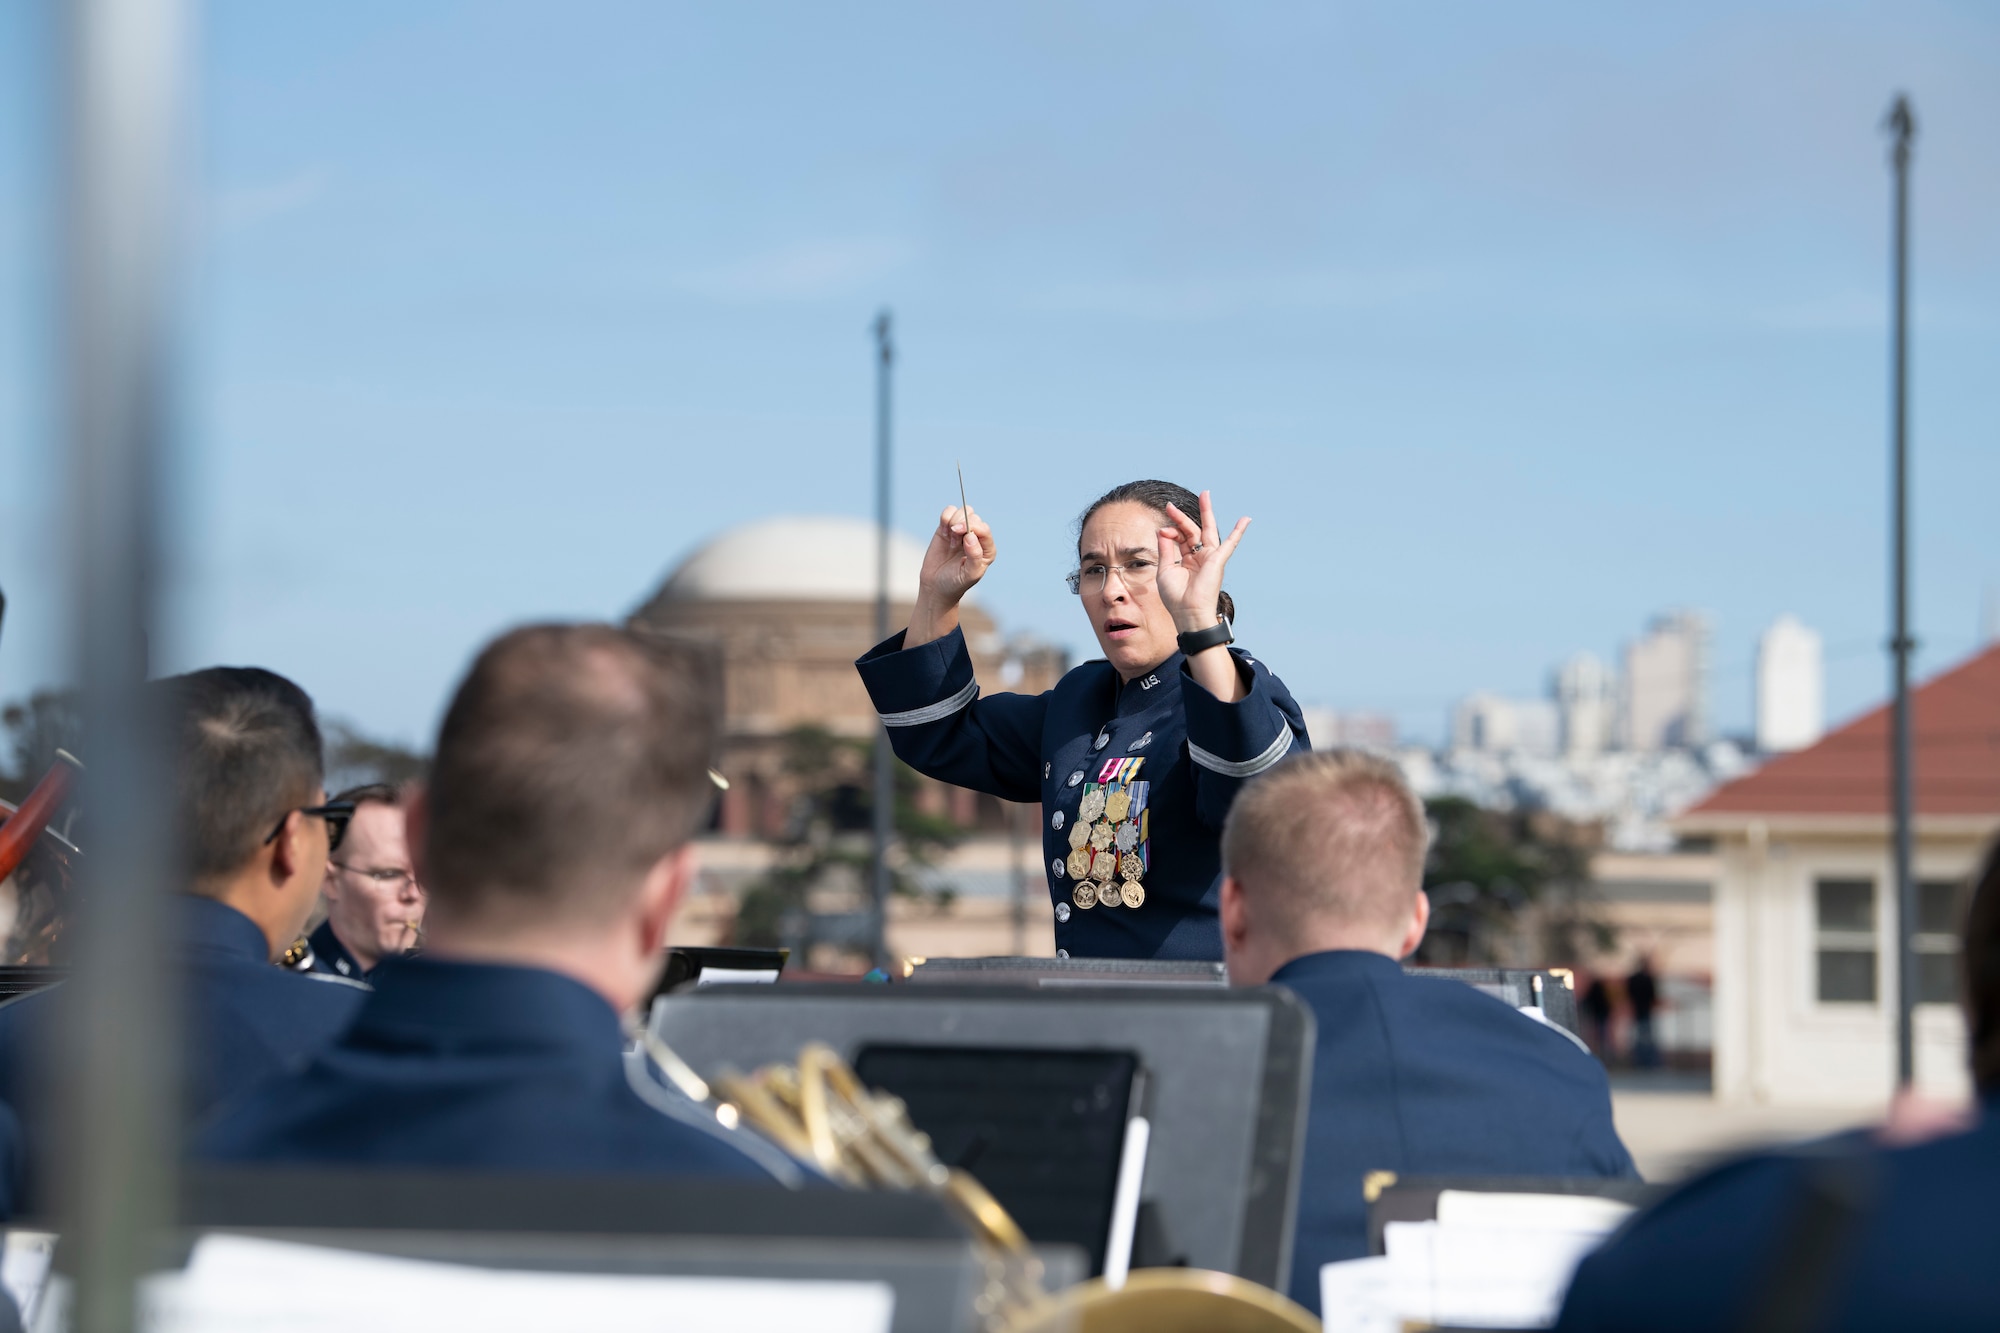 U.S. Air Force Lt. Col. Cristina Urrutia, USAF Band of the Golden West commander and conductor, conducts a performance at the Presidio Tunnel Tops, San Francisco, California, Oct. 6, 2022.